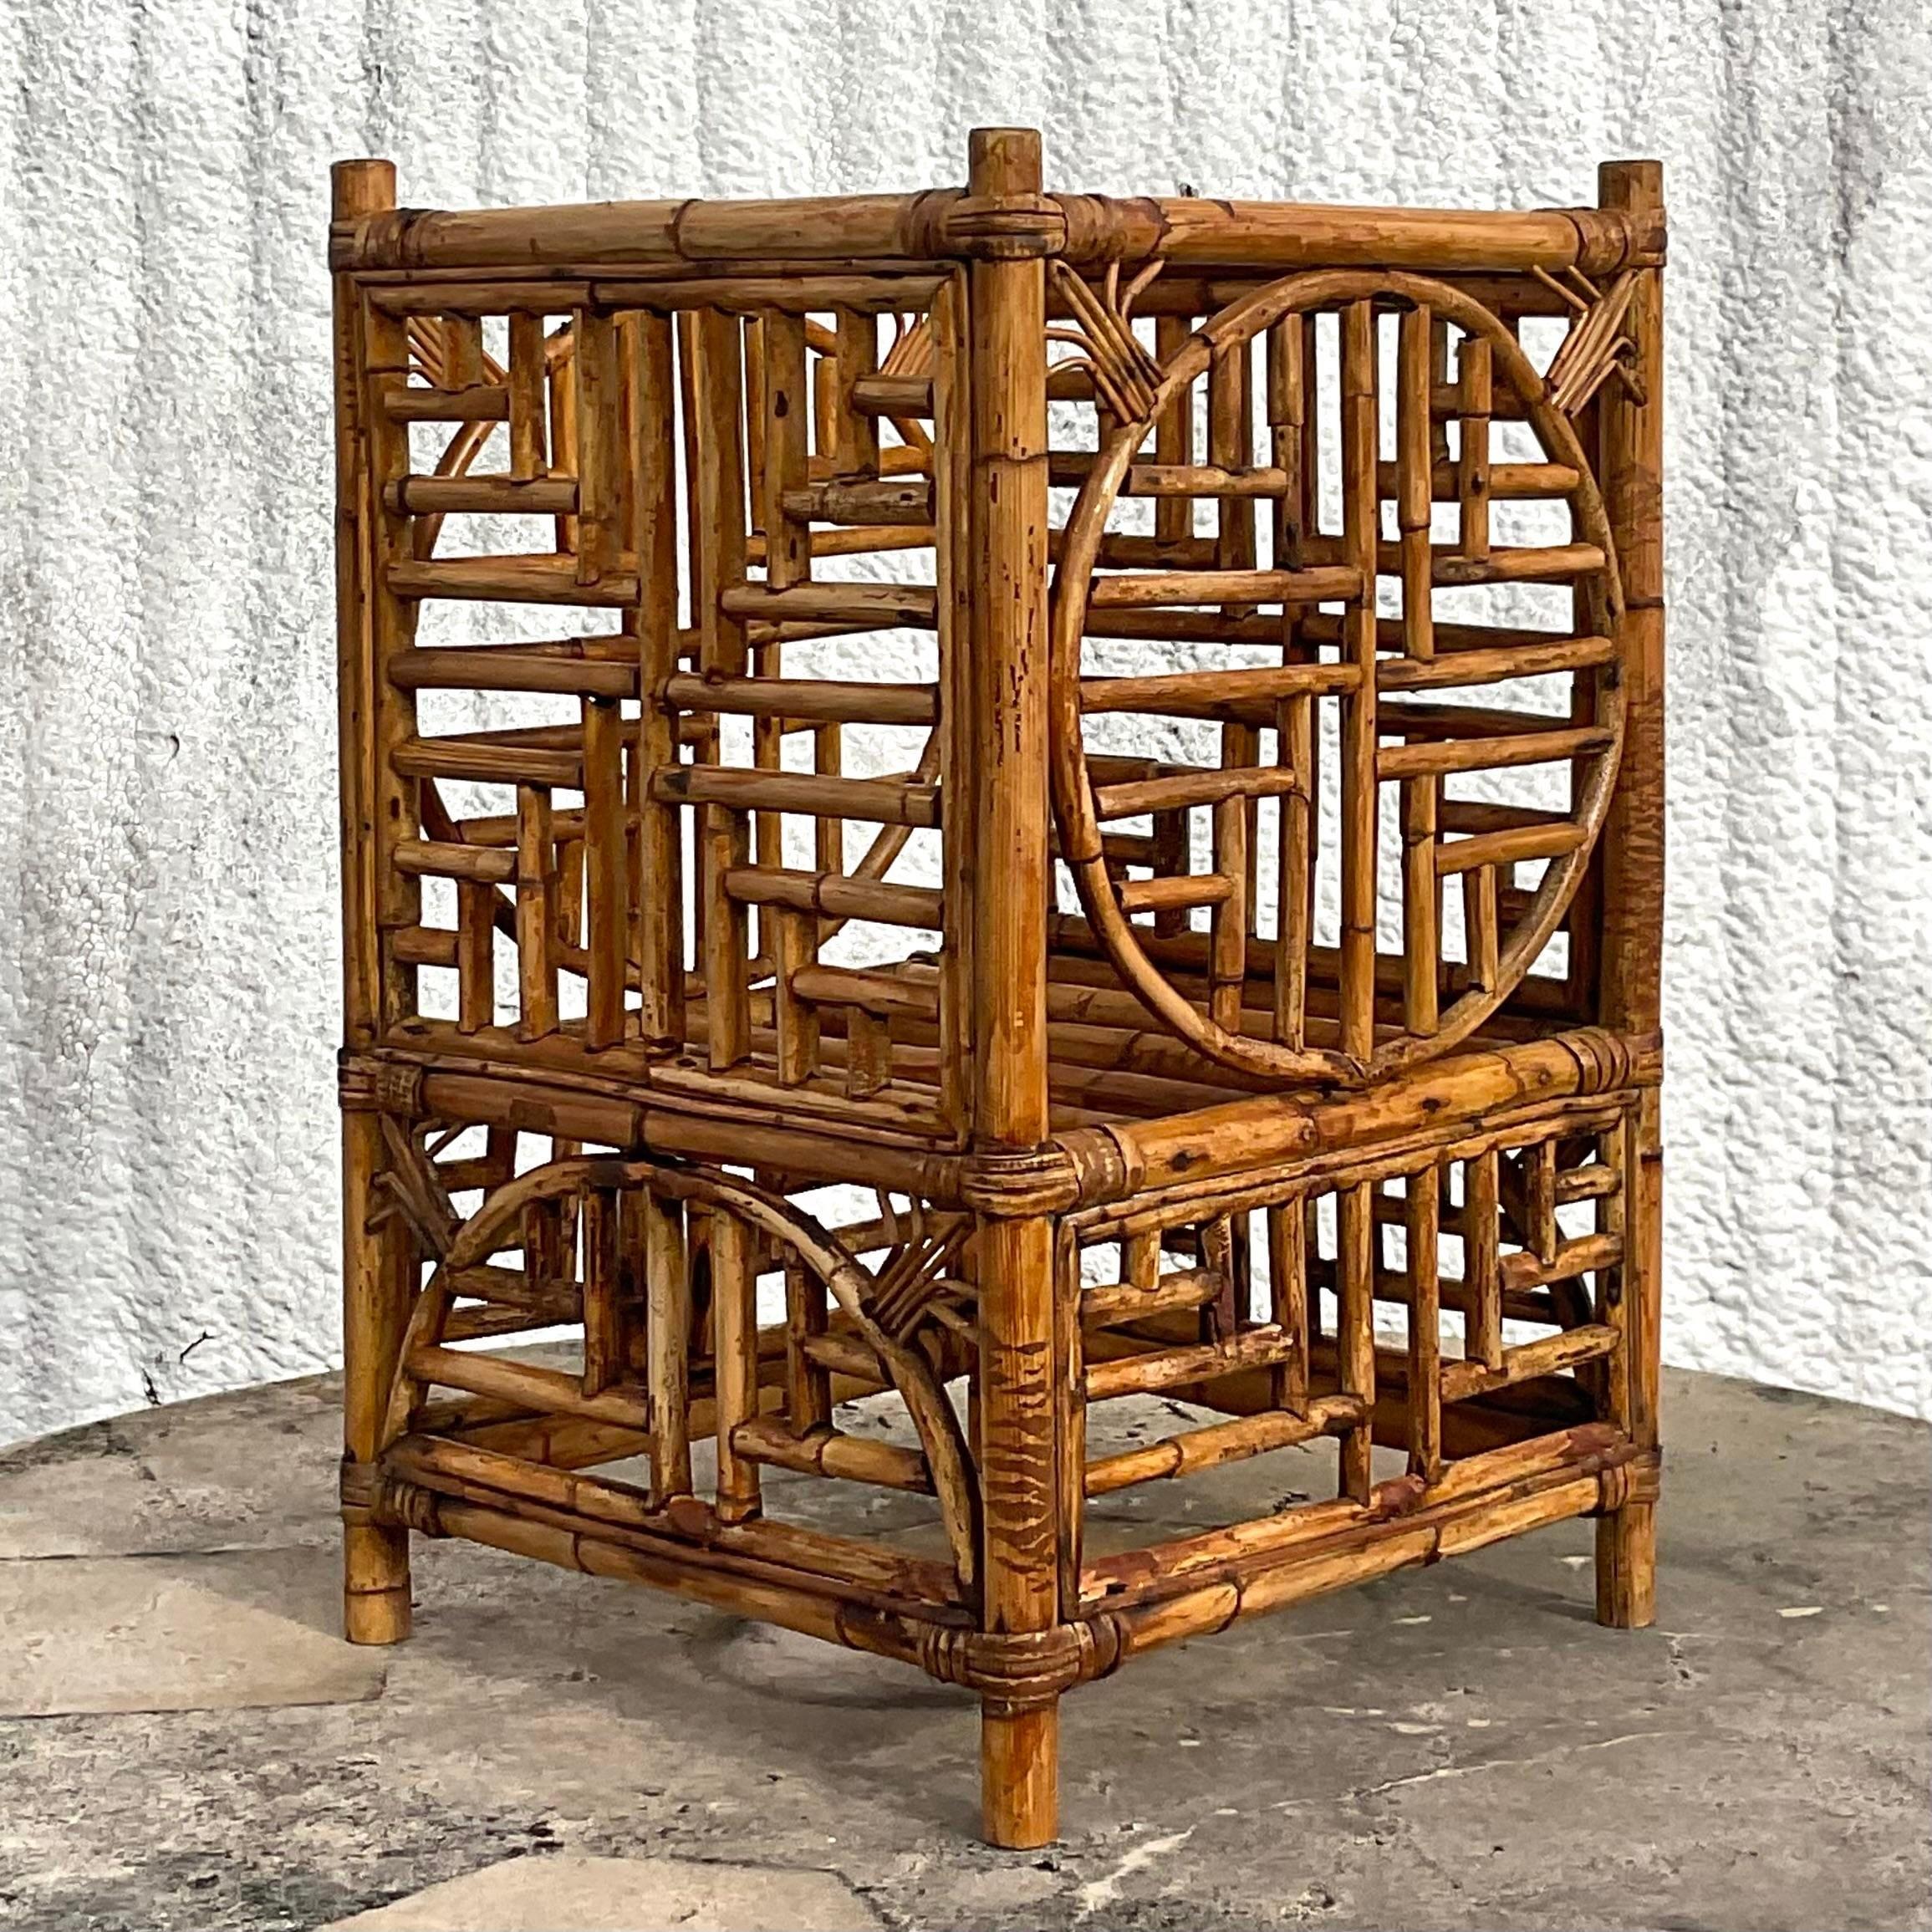 A fabulous vintage Coastal bamboo plant stand. A chic fretwork medallion design in tortoise shell bamboo. Acquired from a Palm Beach estate.